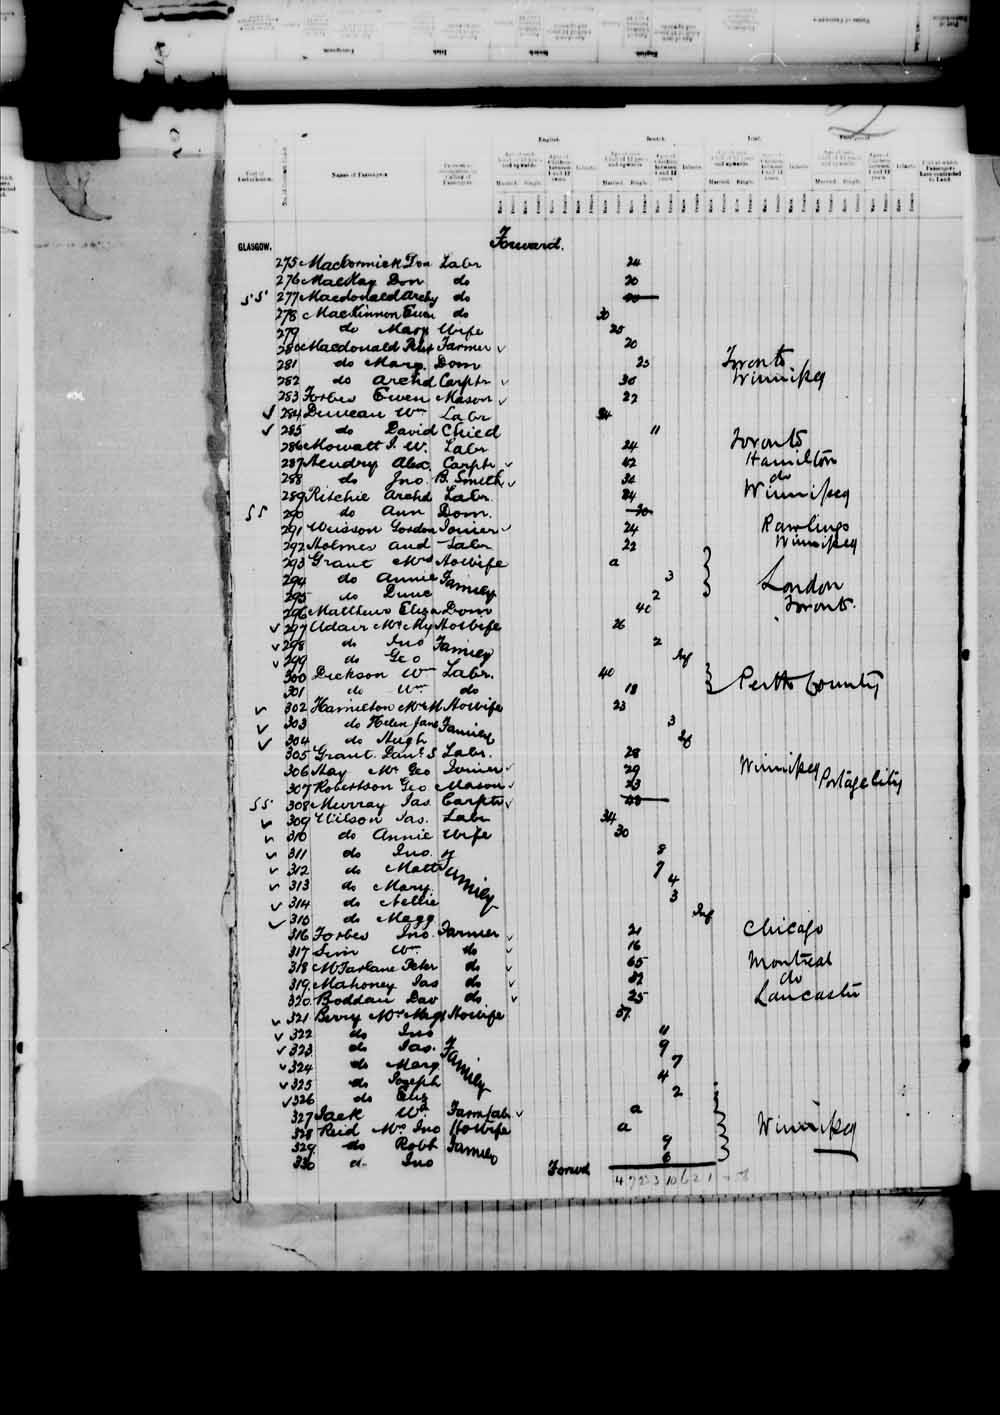 Digitized page of Passenger Lists for Image No.: e003542667